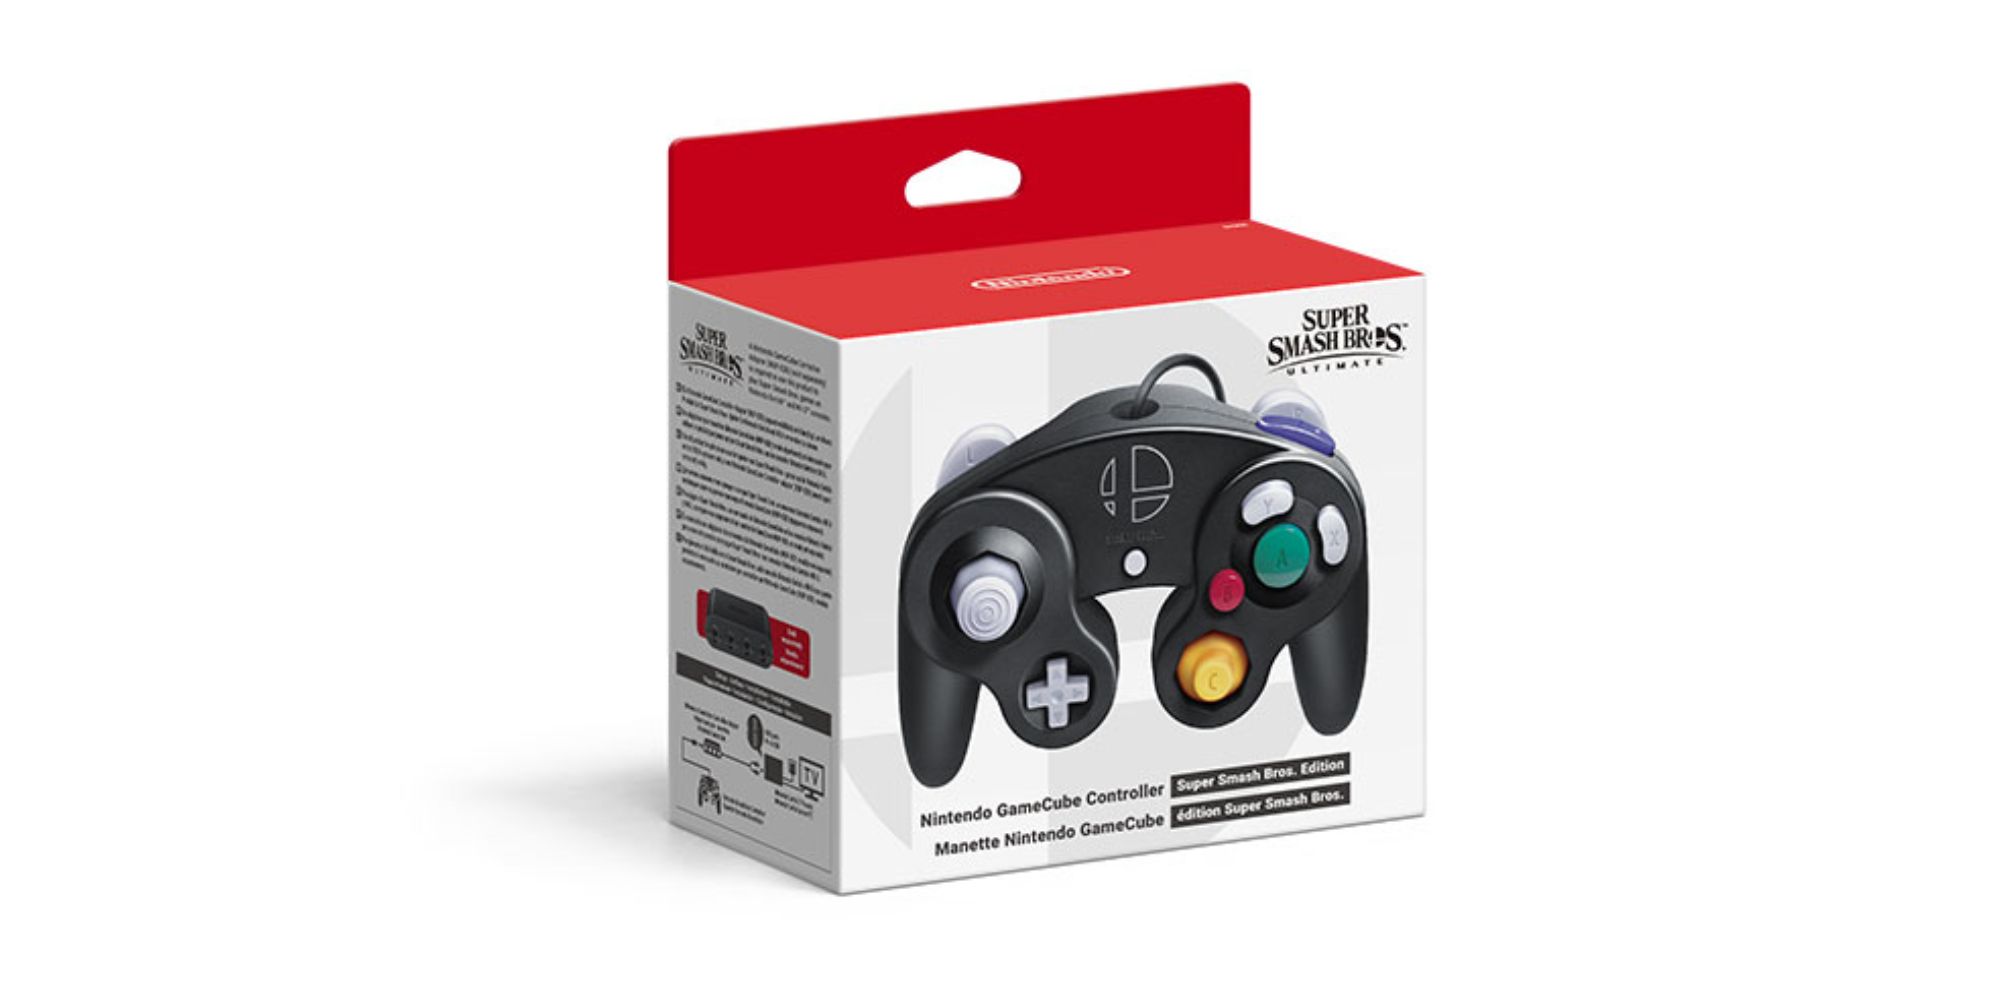 Switch Accessories a close up of a Nintendo Switch GameCube Controller box featuring a GameCube controller with the Super Smash Bros. logo on it